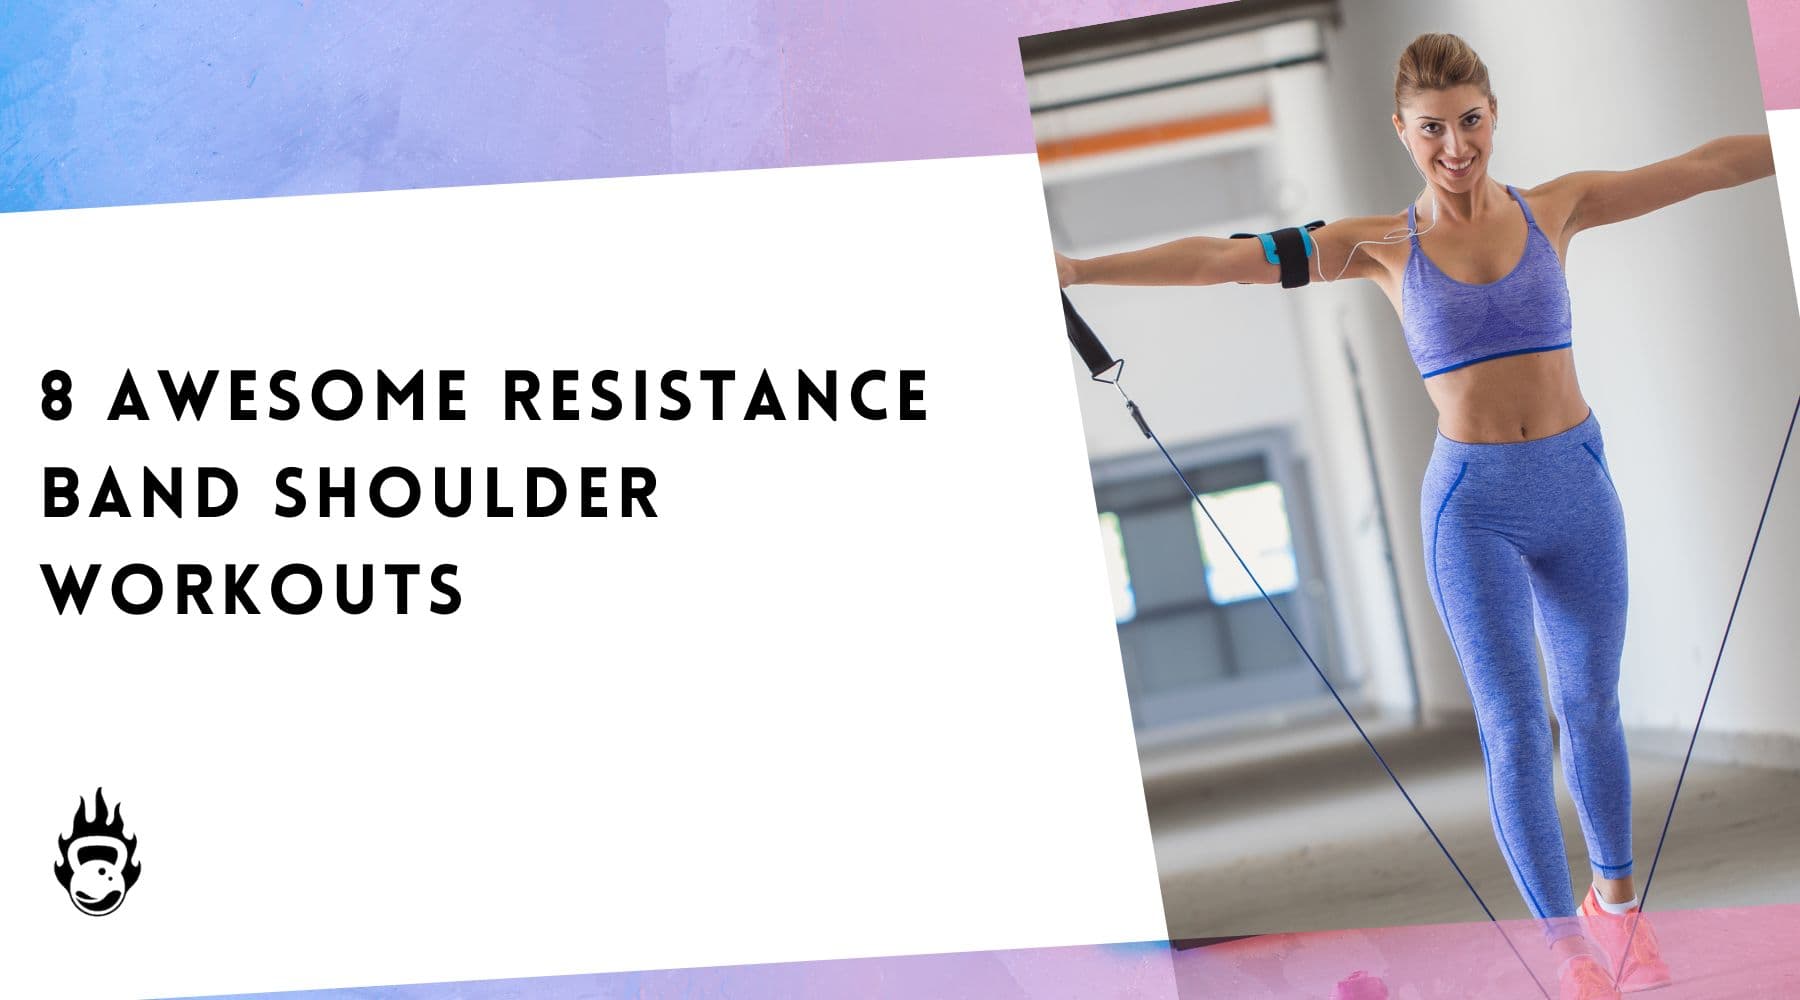 8 Awesome Resistance Band Shoulder Workouts